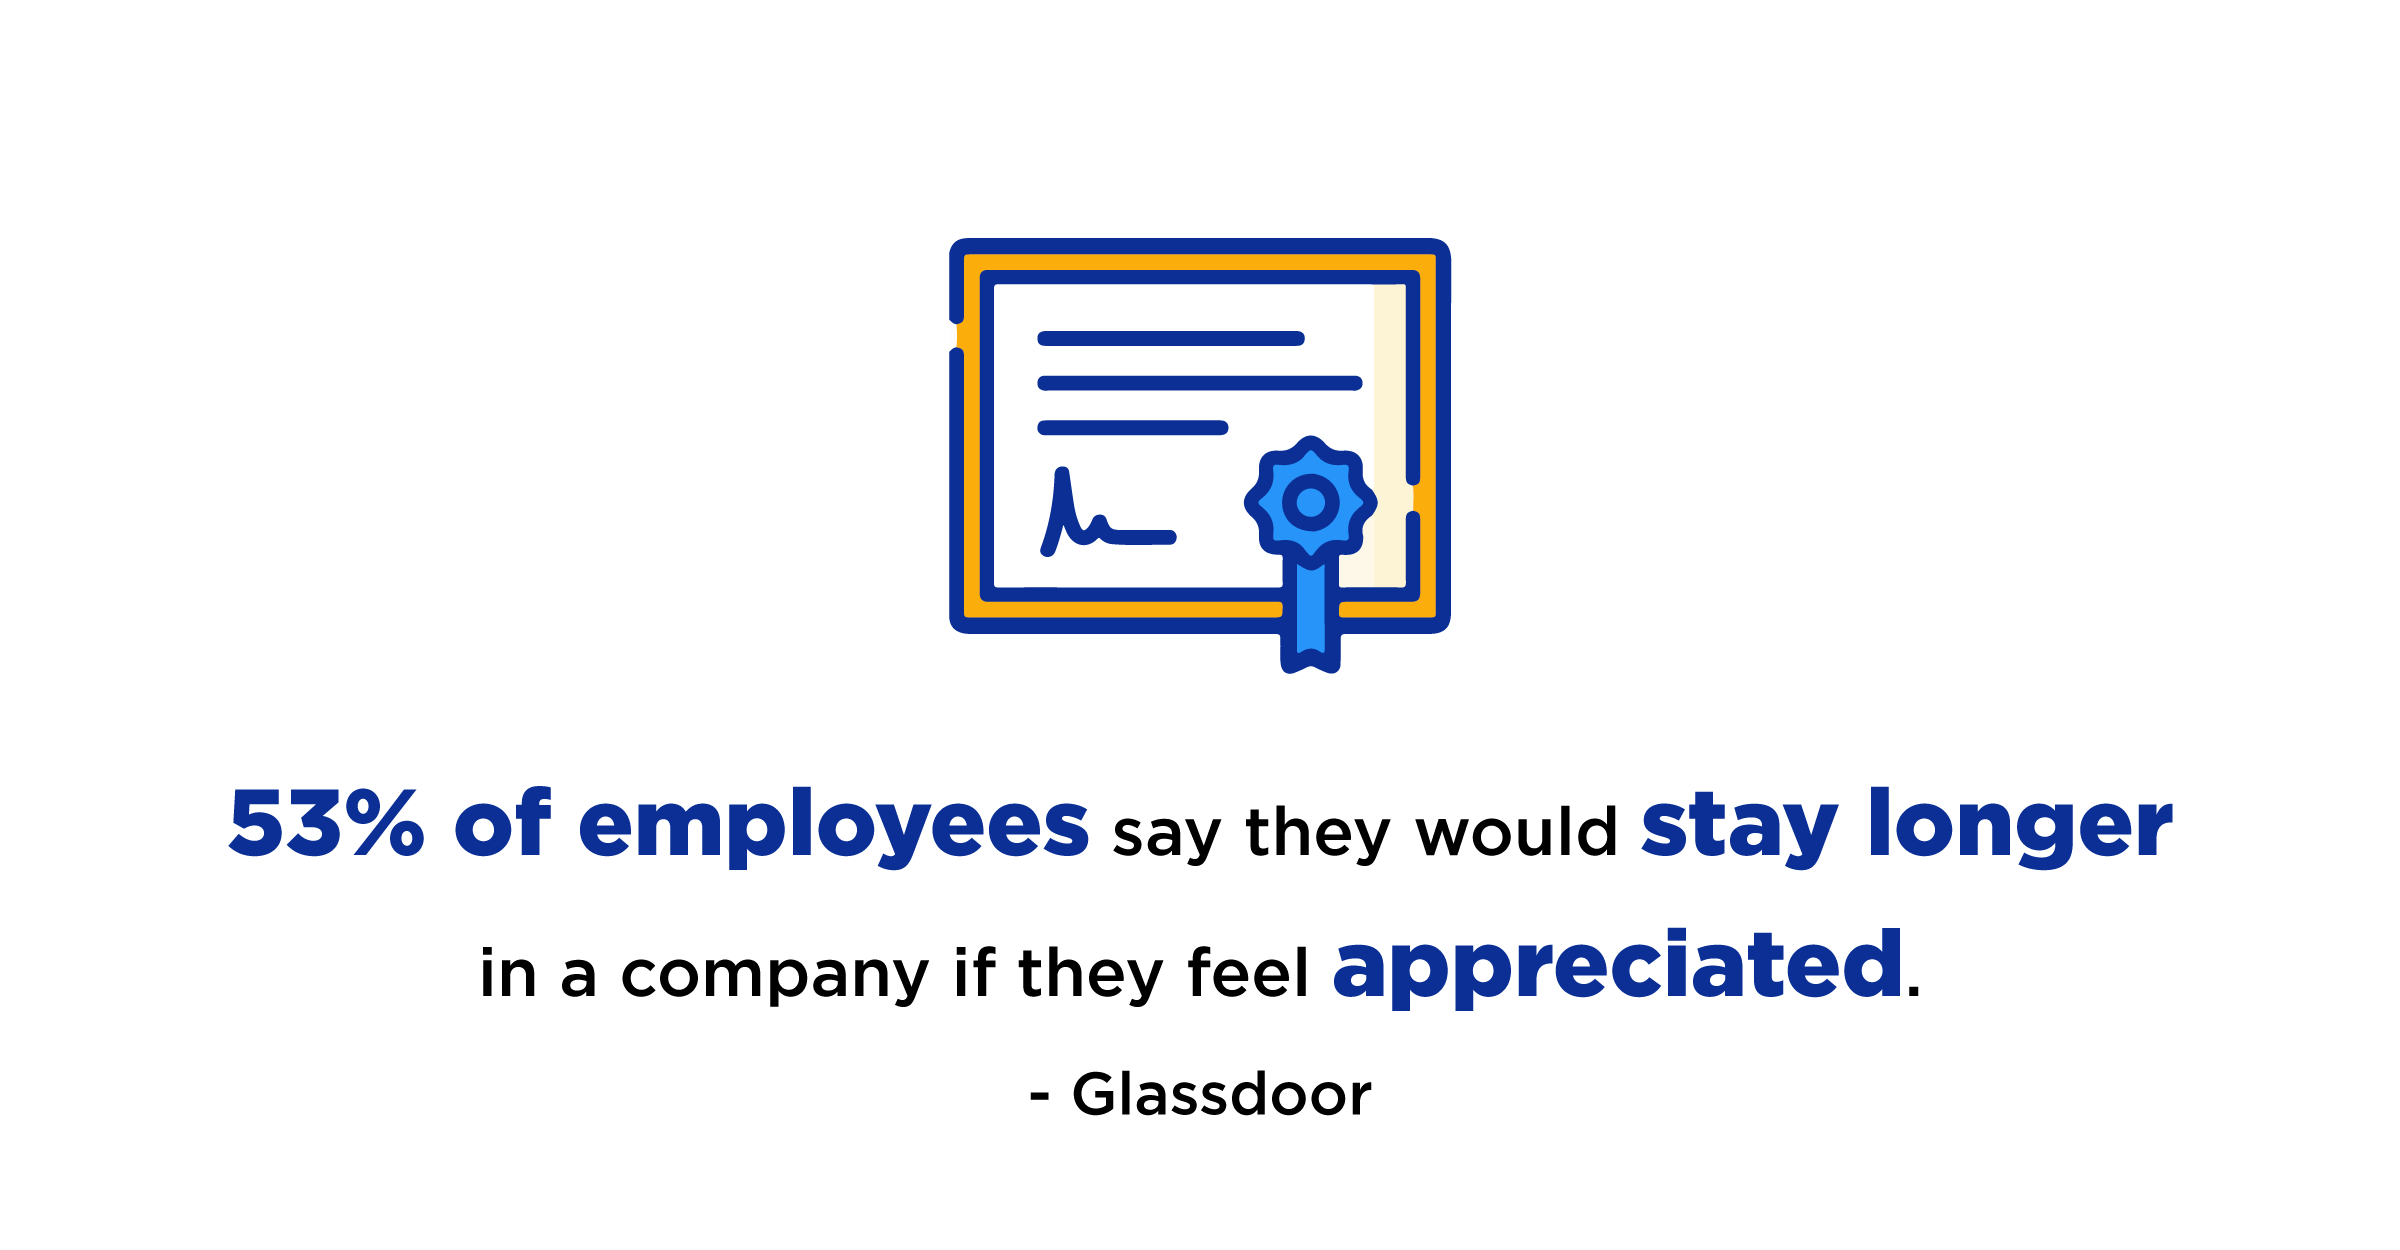 employee-recognition-misconceptions (2)